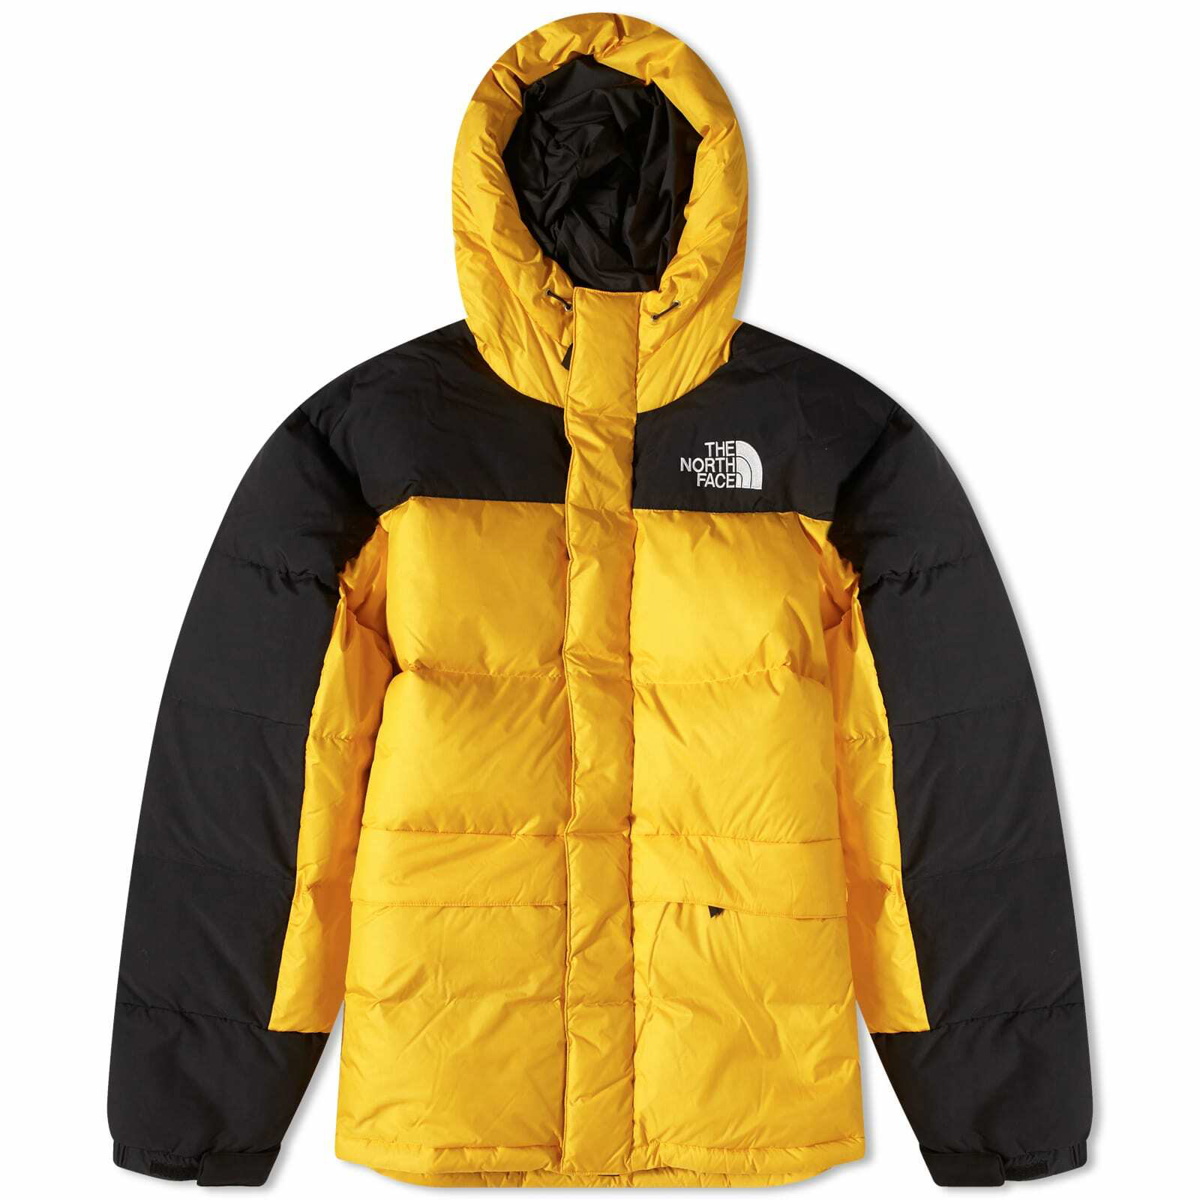 The North Face Men's Himalayan Down Parka Jacket in Summit Gold/Tnf ...